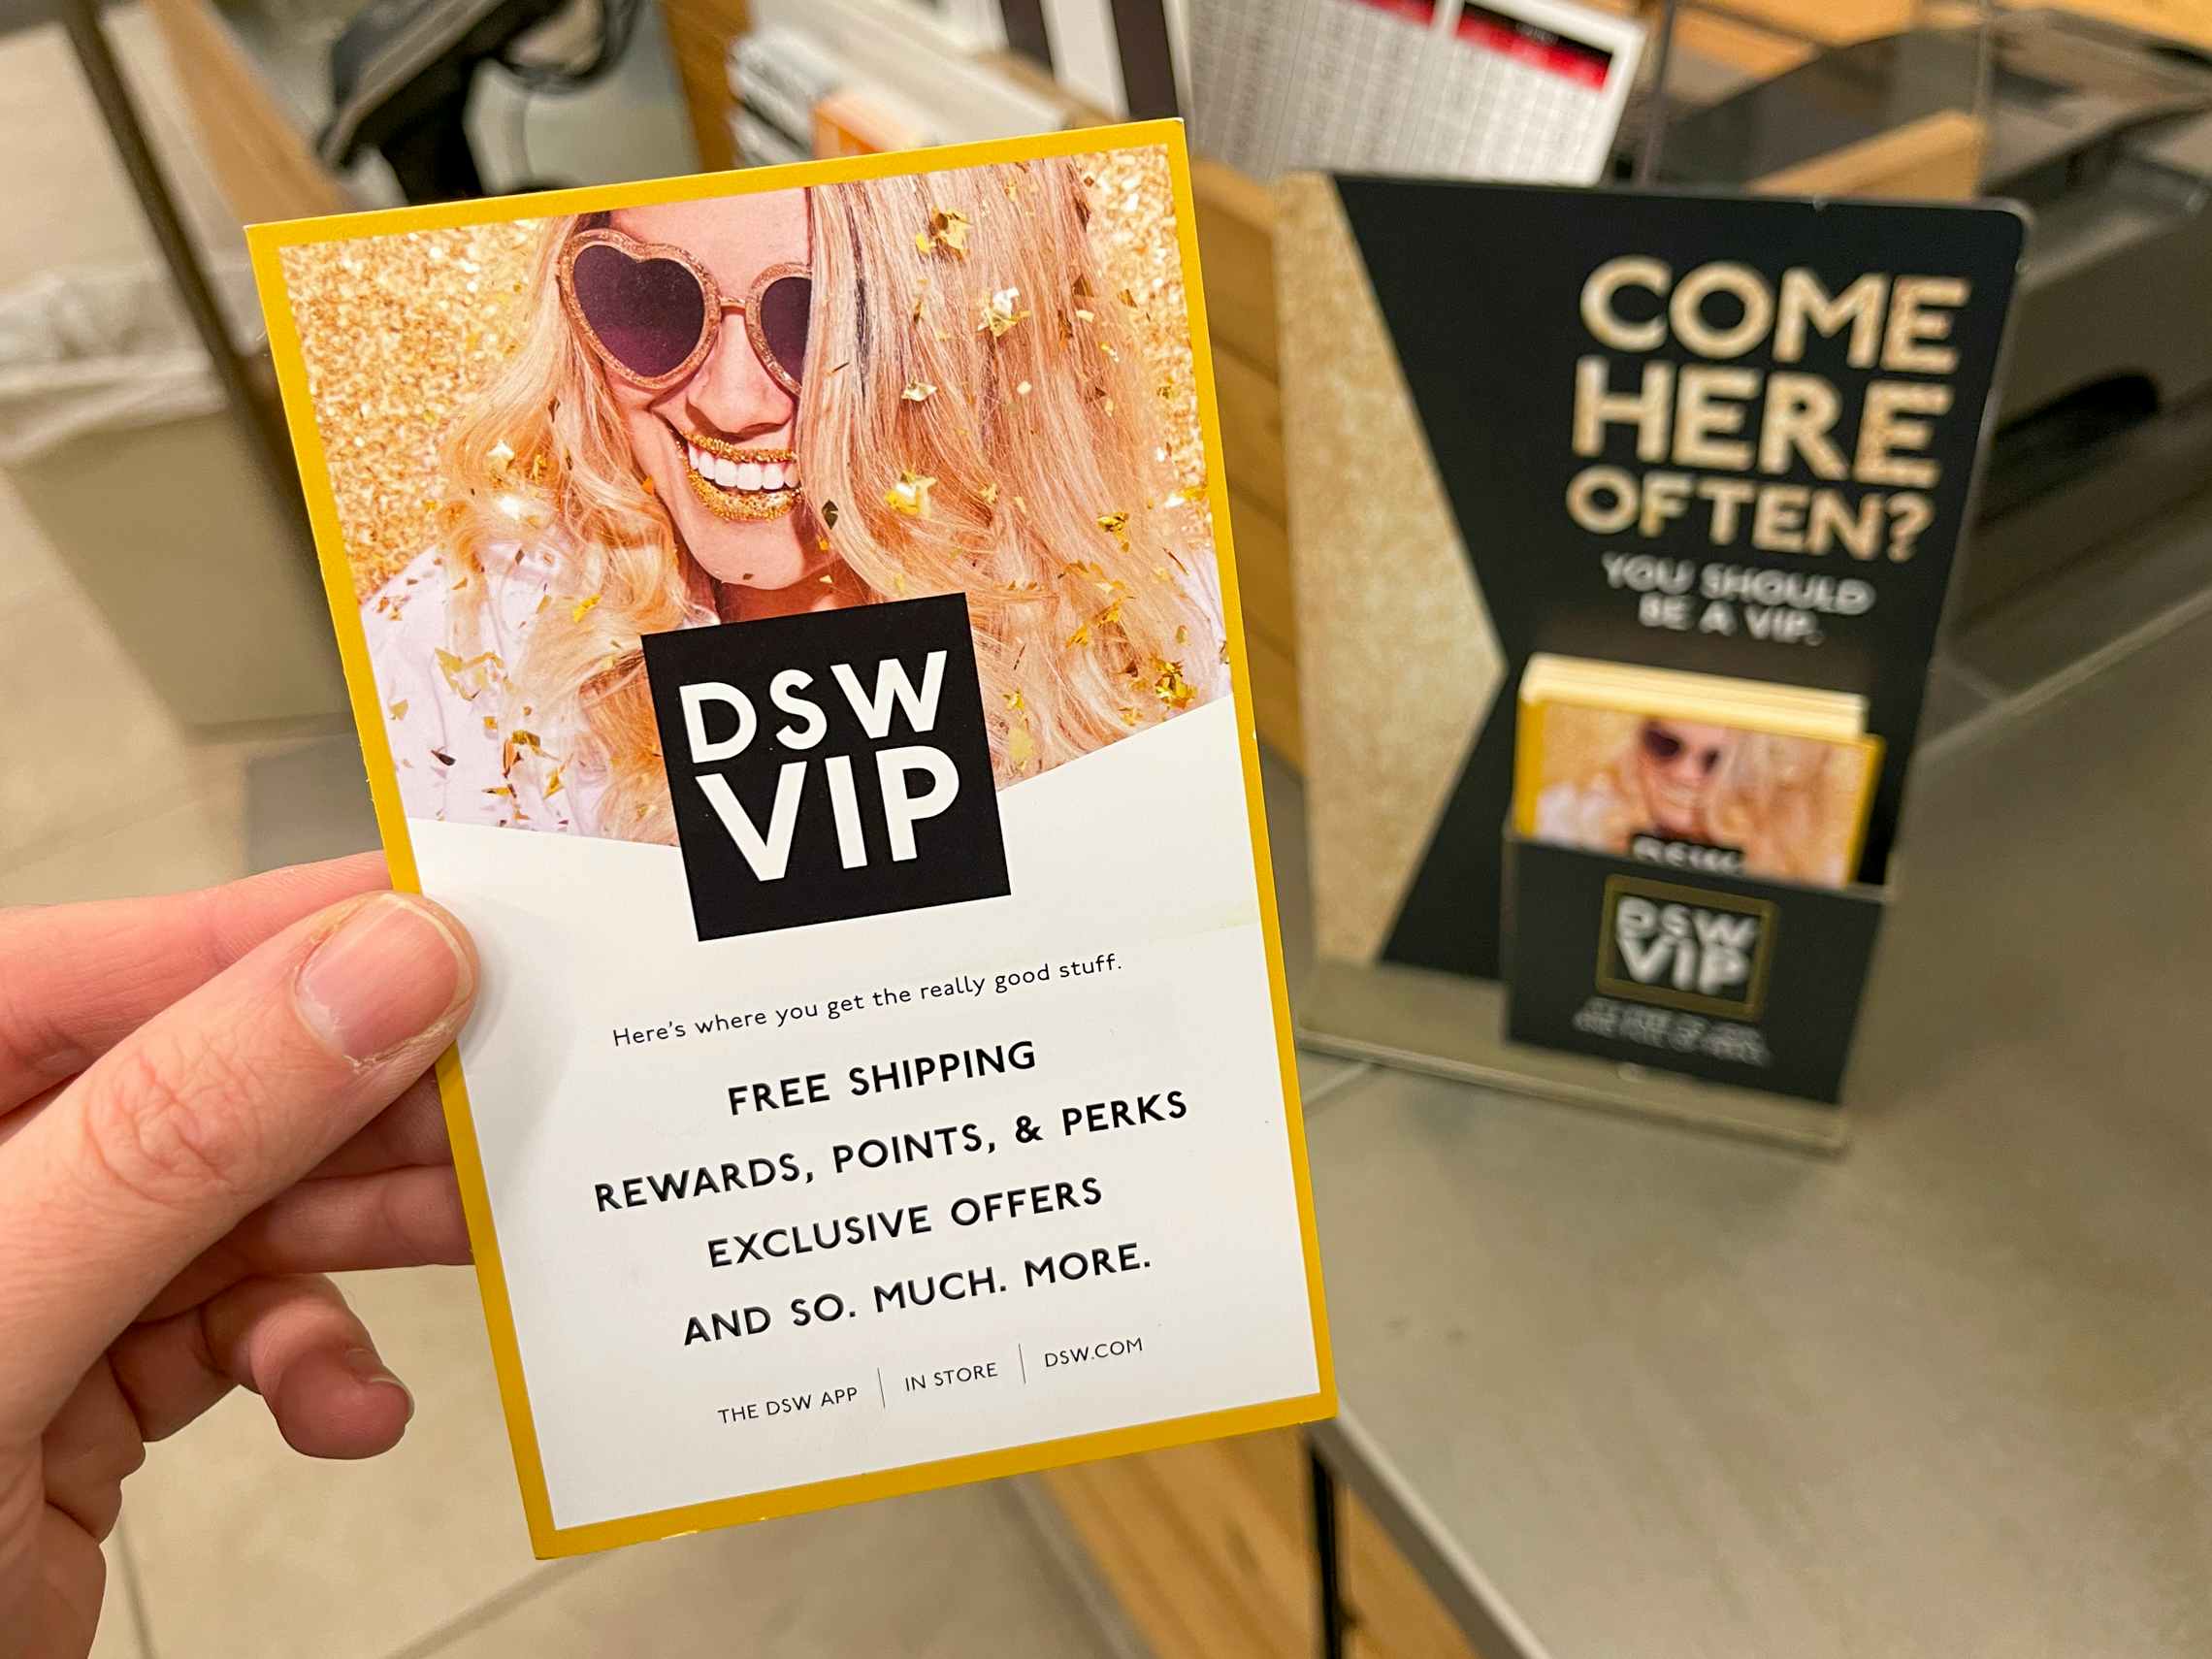 A person holding up a DSW VIP info card near checkout.